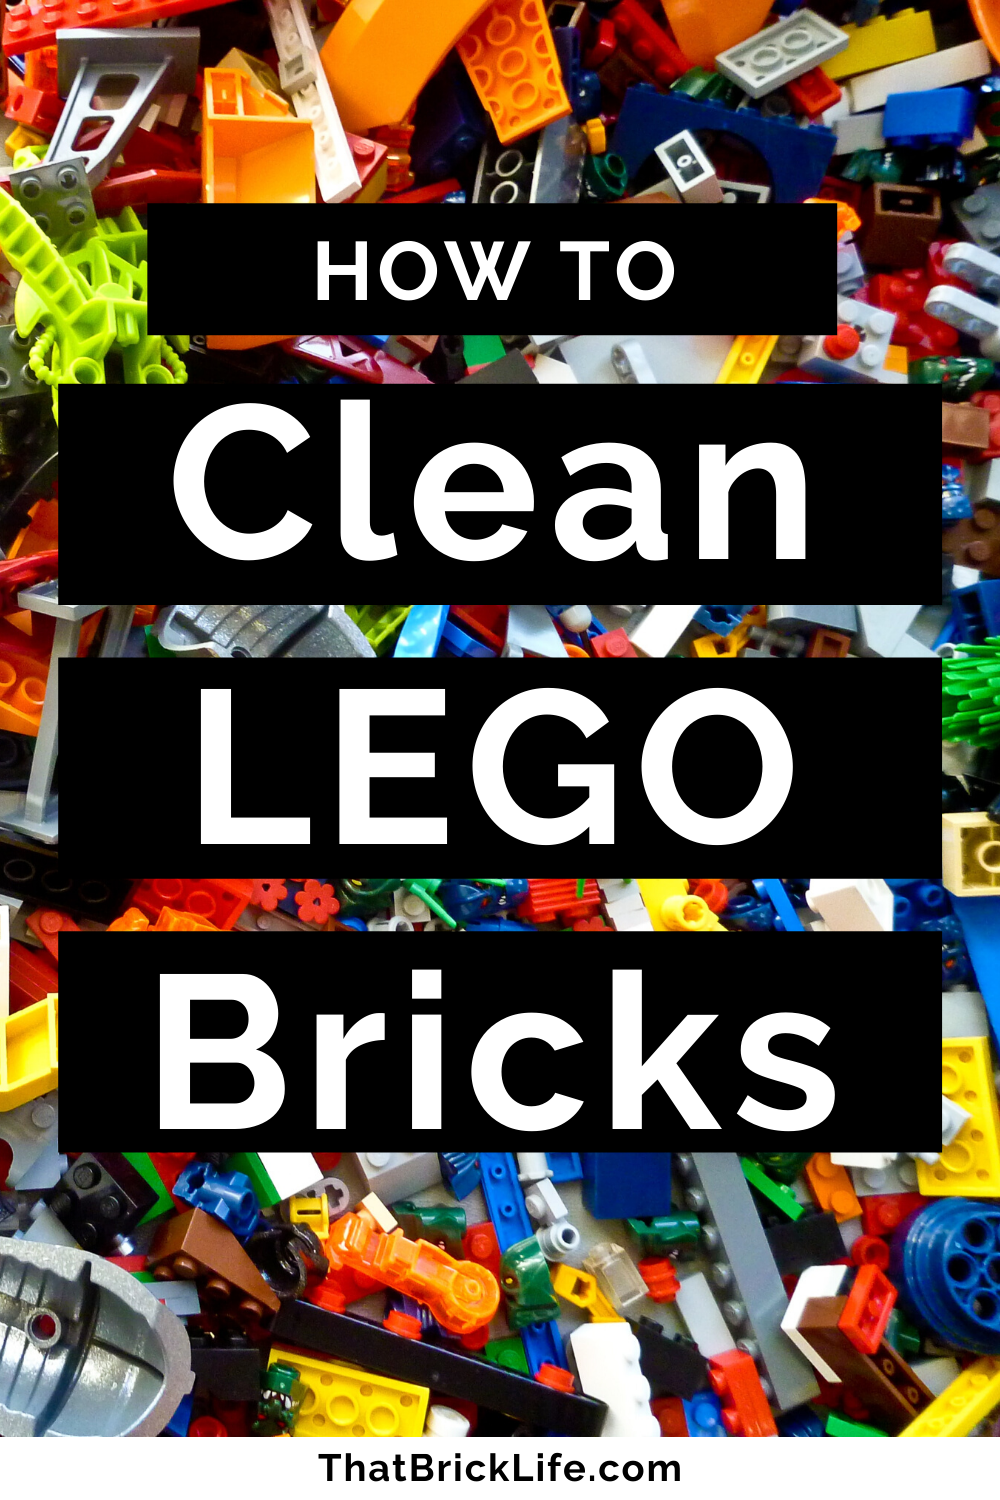 How to Clean and Sanitize LEGO - That Brick Life